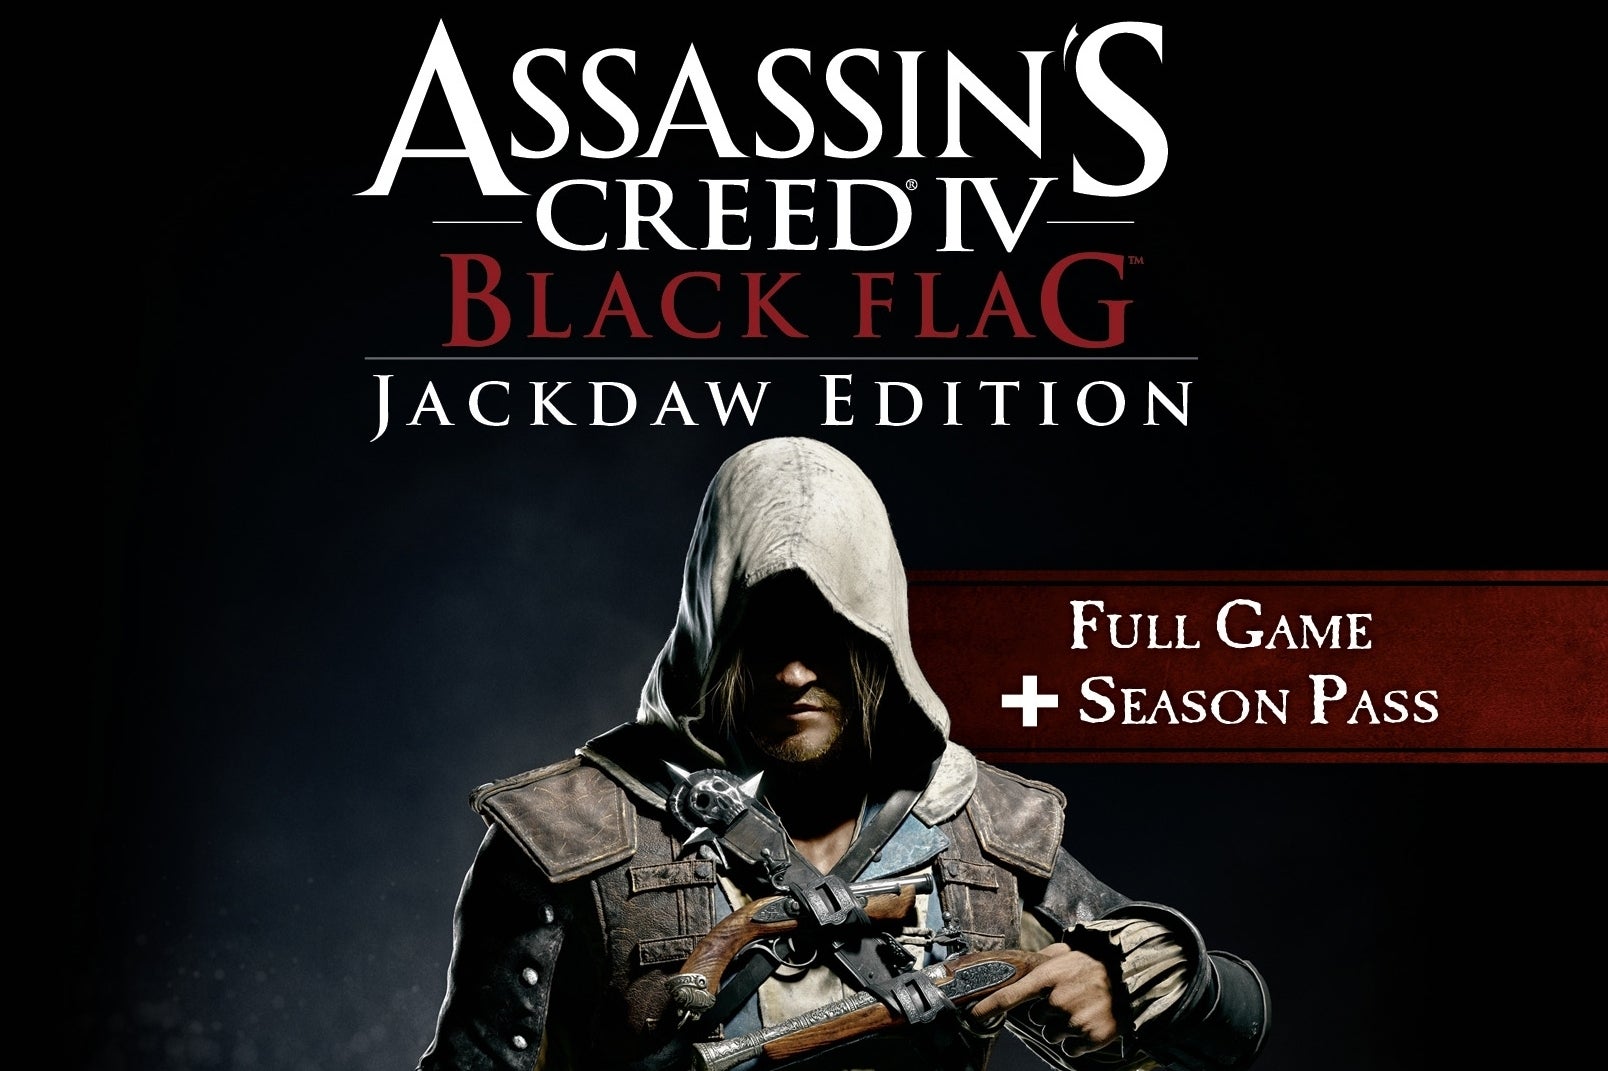 Image for Assassin's Creed 4: Black Flag GOTY Edition announced